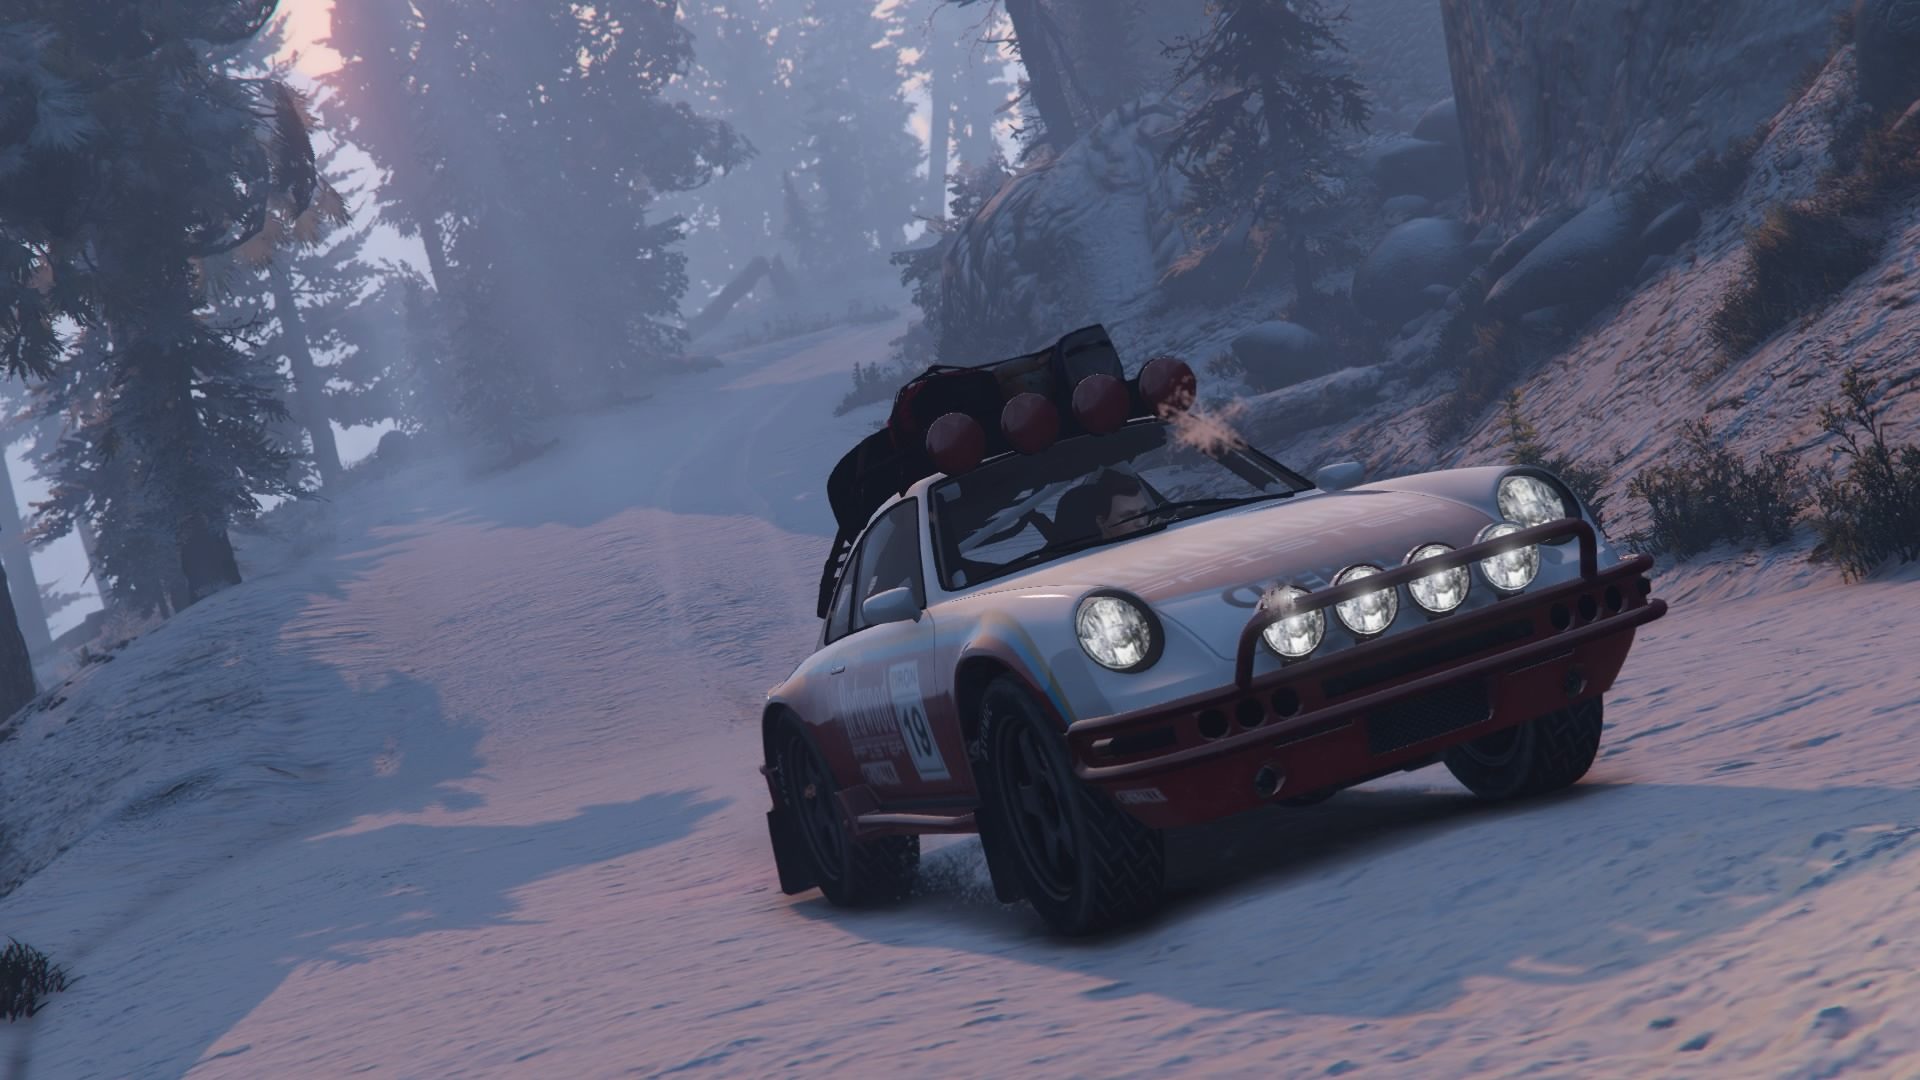 Grand Theft Auto V - Rallying In The Snow - 34